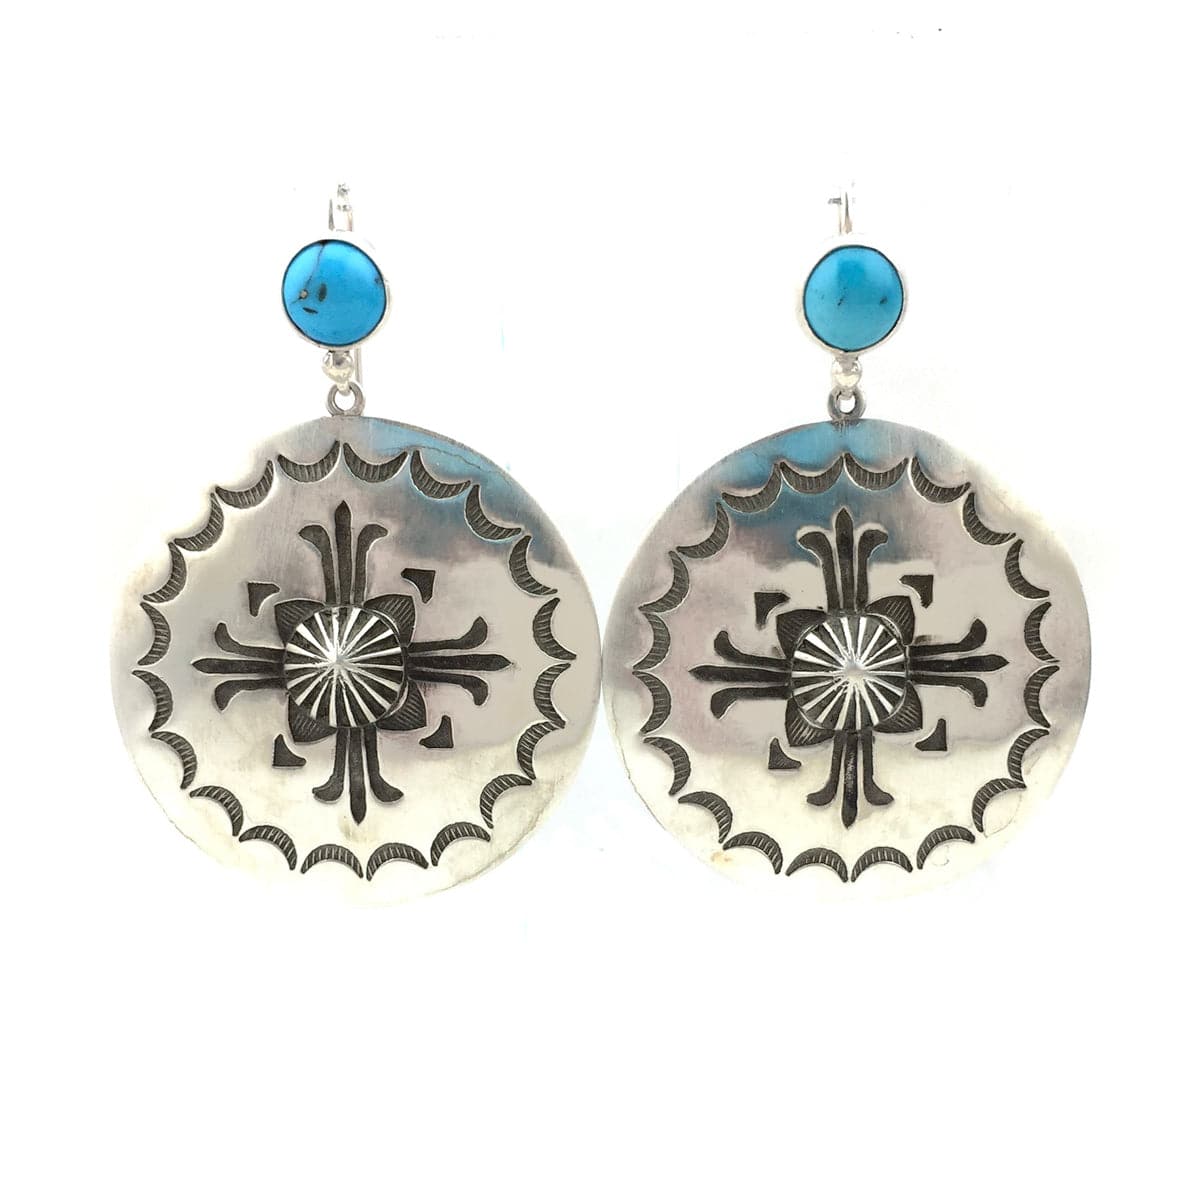 Kee Nataani - Navajo Contemporary Morenci Turquoise and Sterling Silver Hook Earrings with Stamped Design, 2" x 1.5" (J13903)